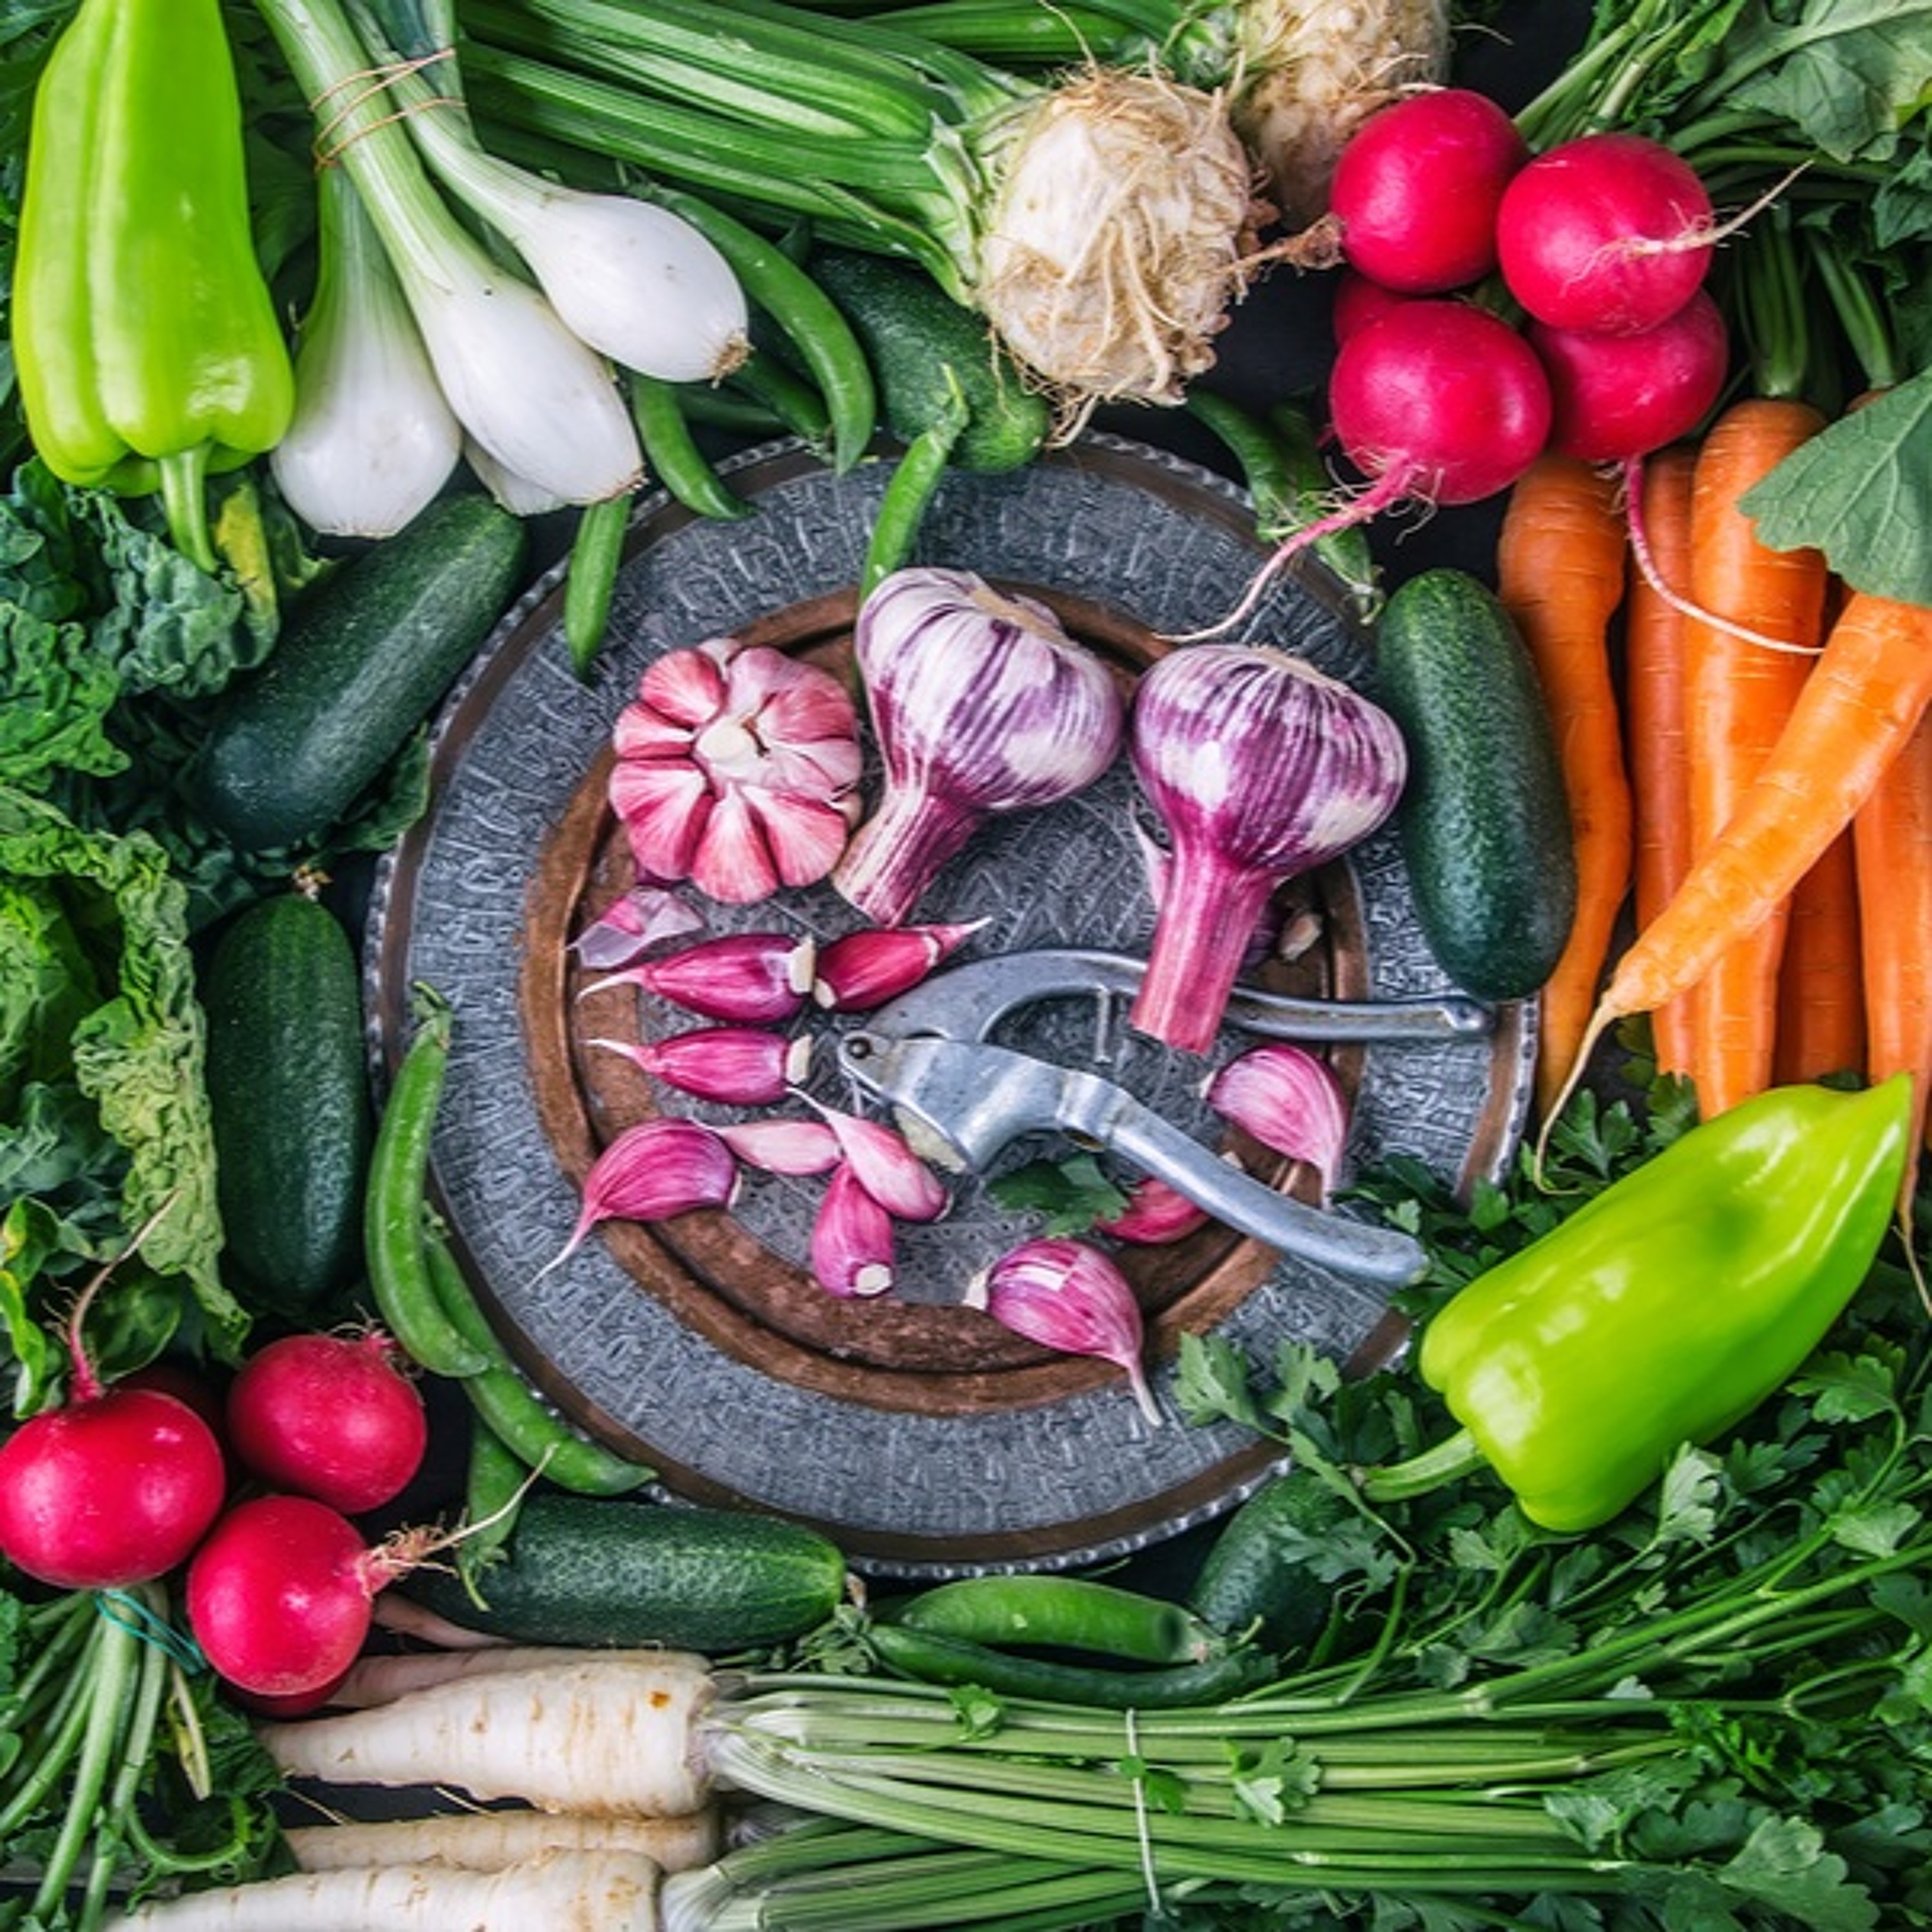 Healing Power Of Vegetables - Radio Show Archive